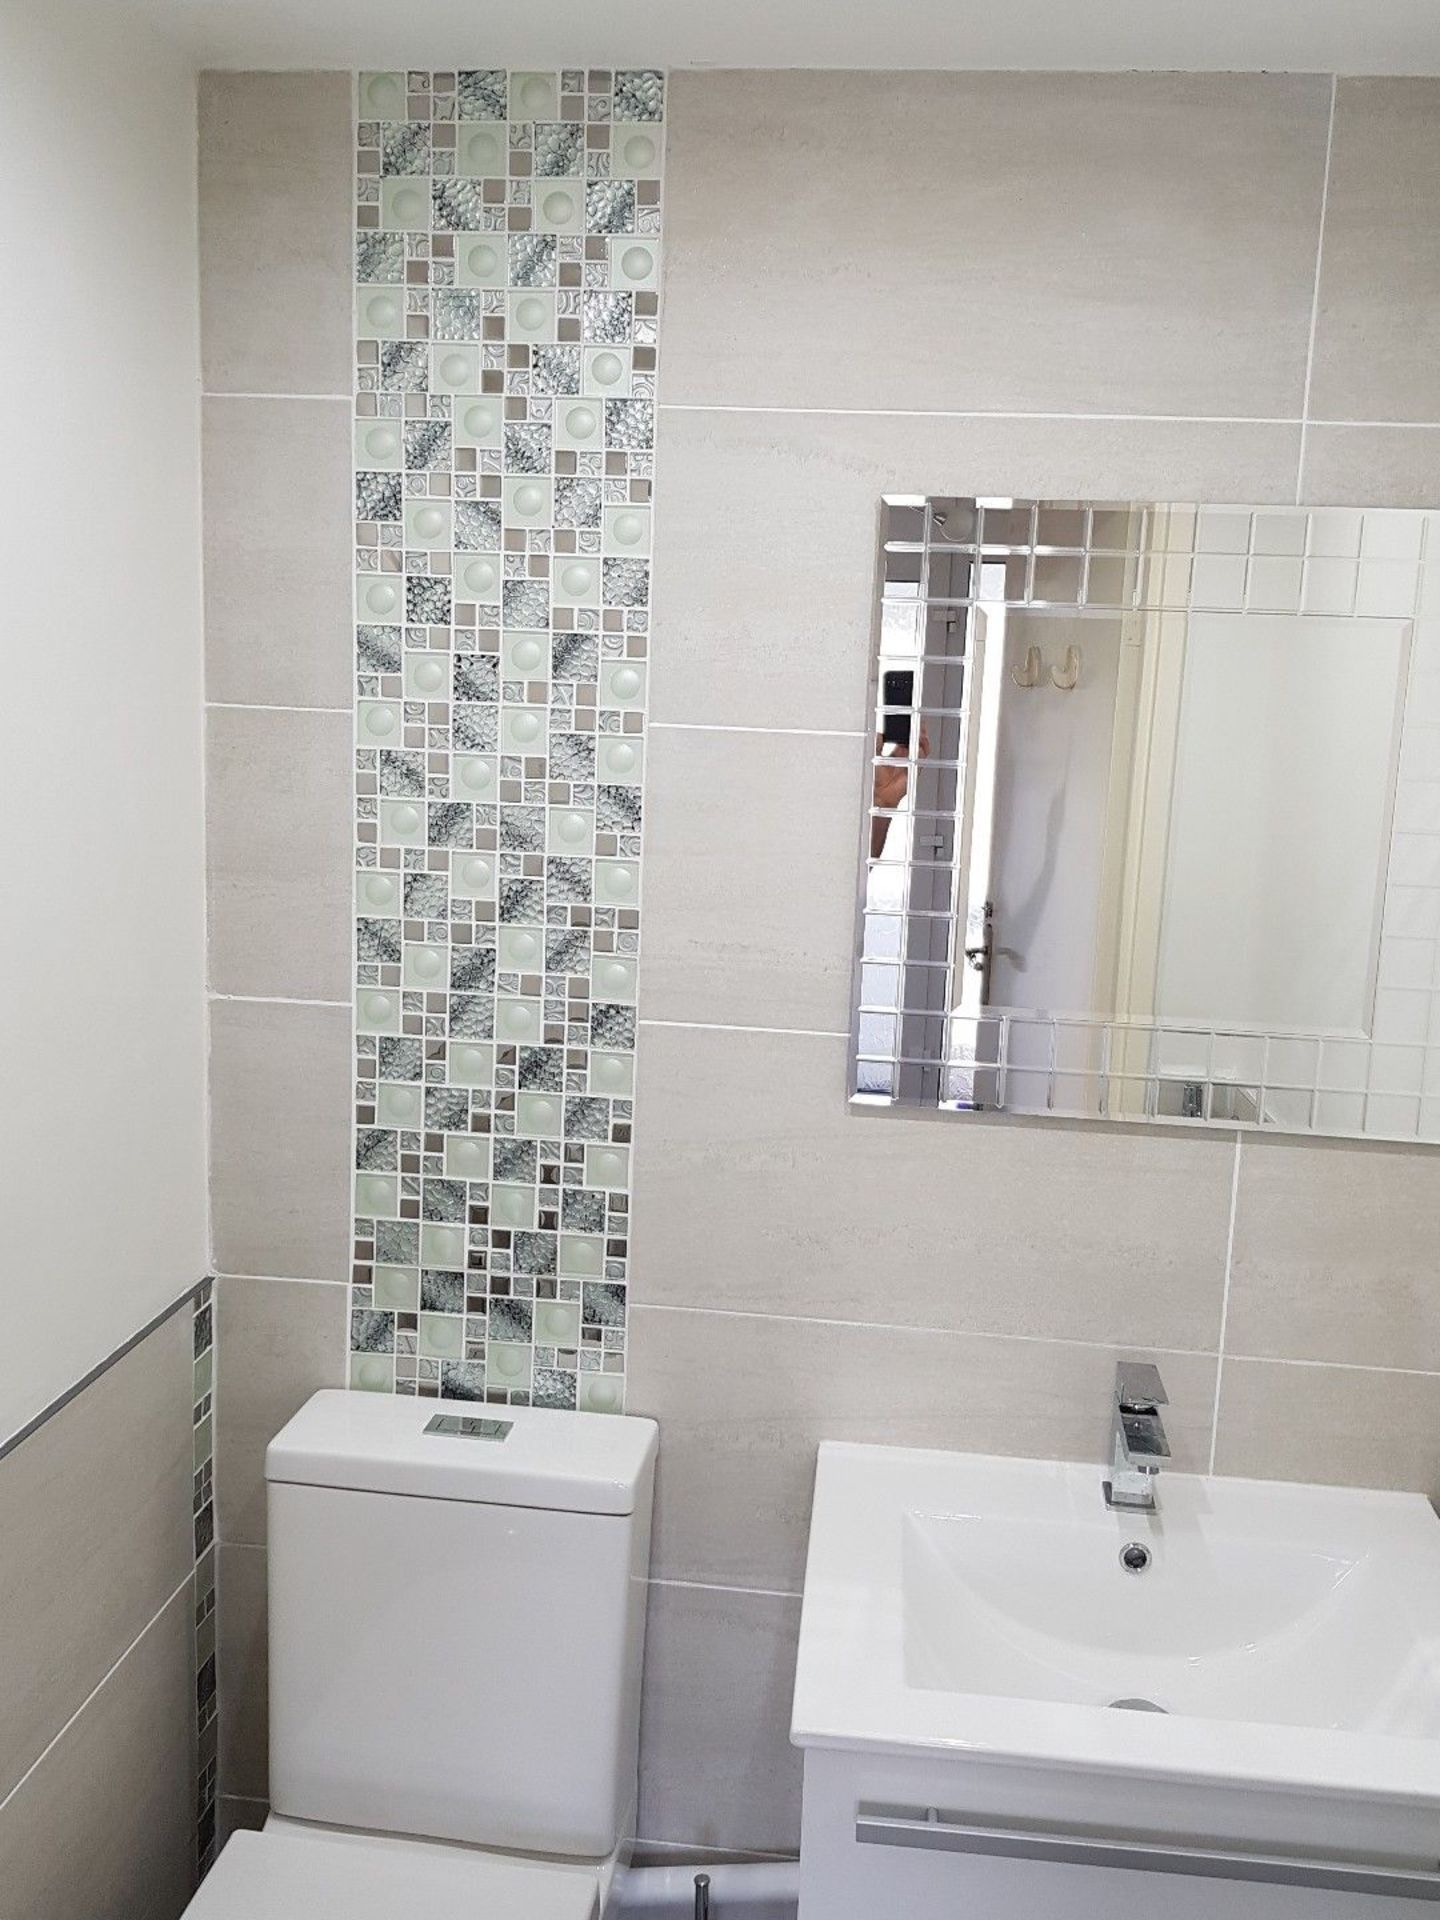 10 Square Metres - High Quality Glass/Stainless Steel Mosaic Tiles - Image 2 of 6